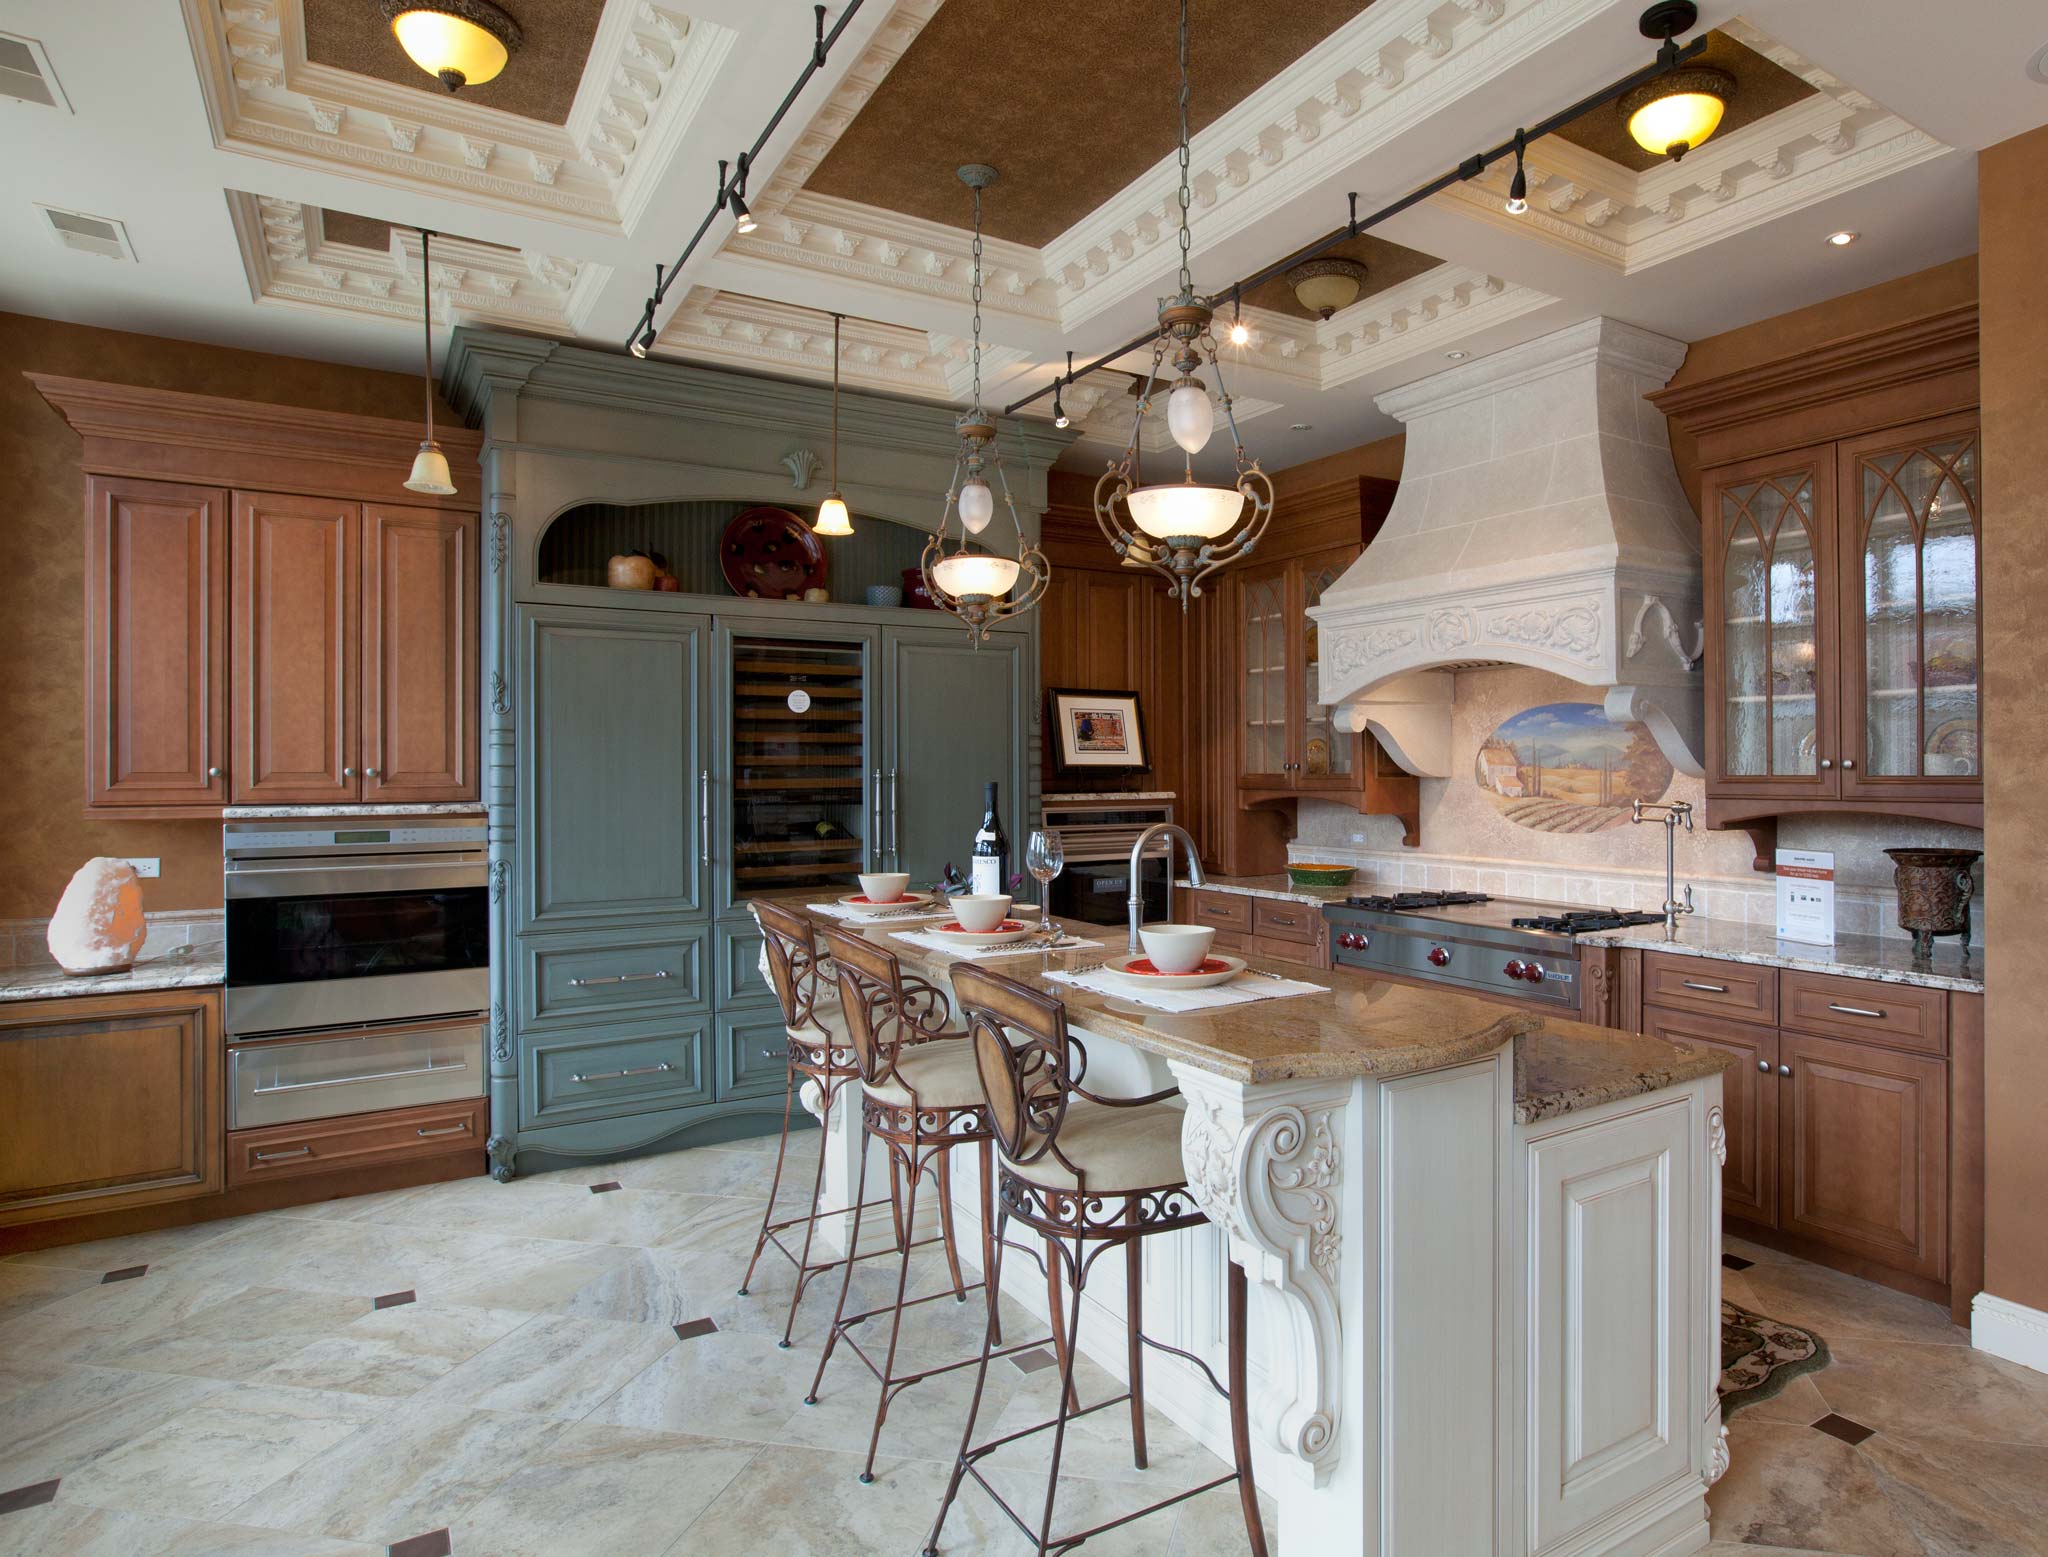 Kitchen Remodeling And Design Mr Floor Companies Chicago Il